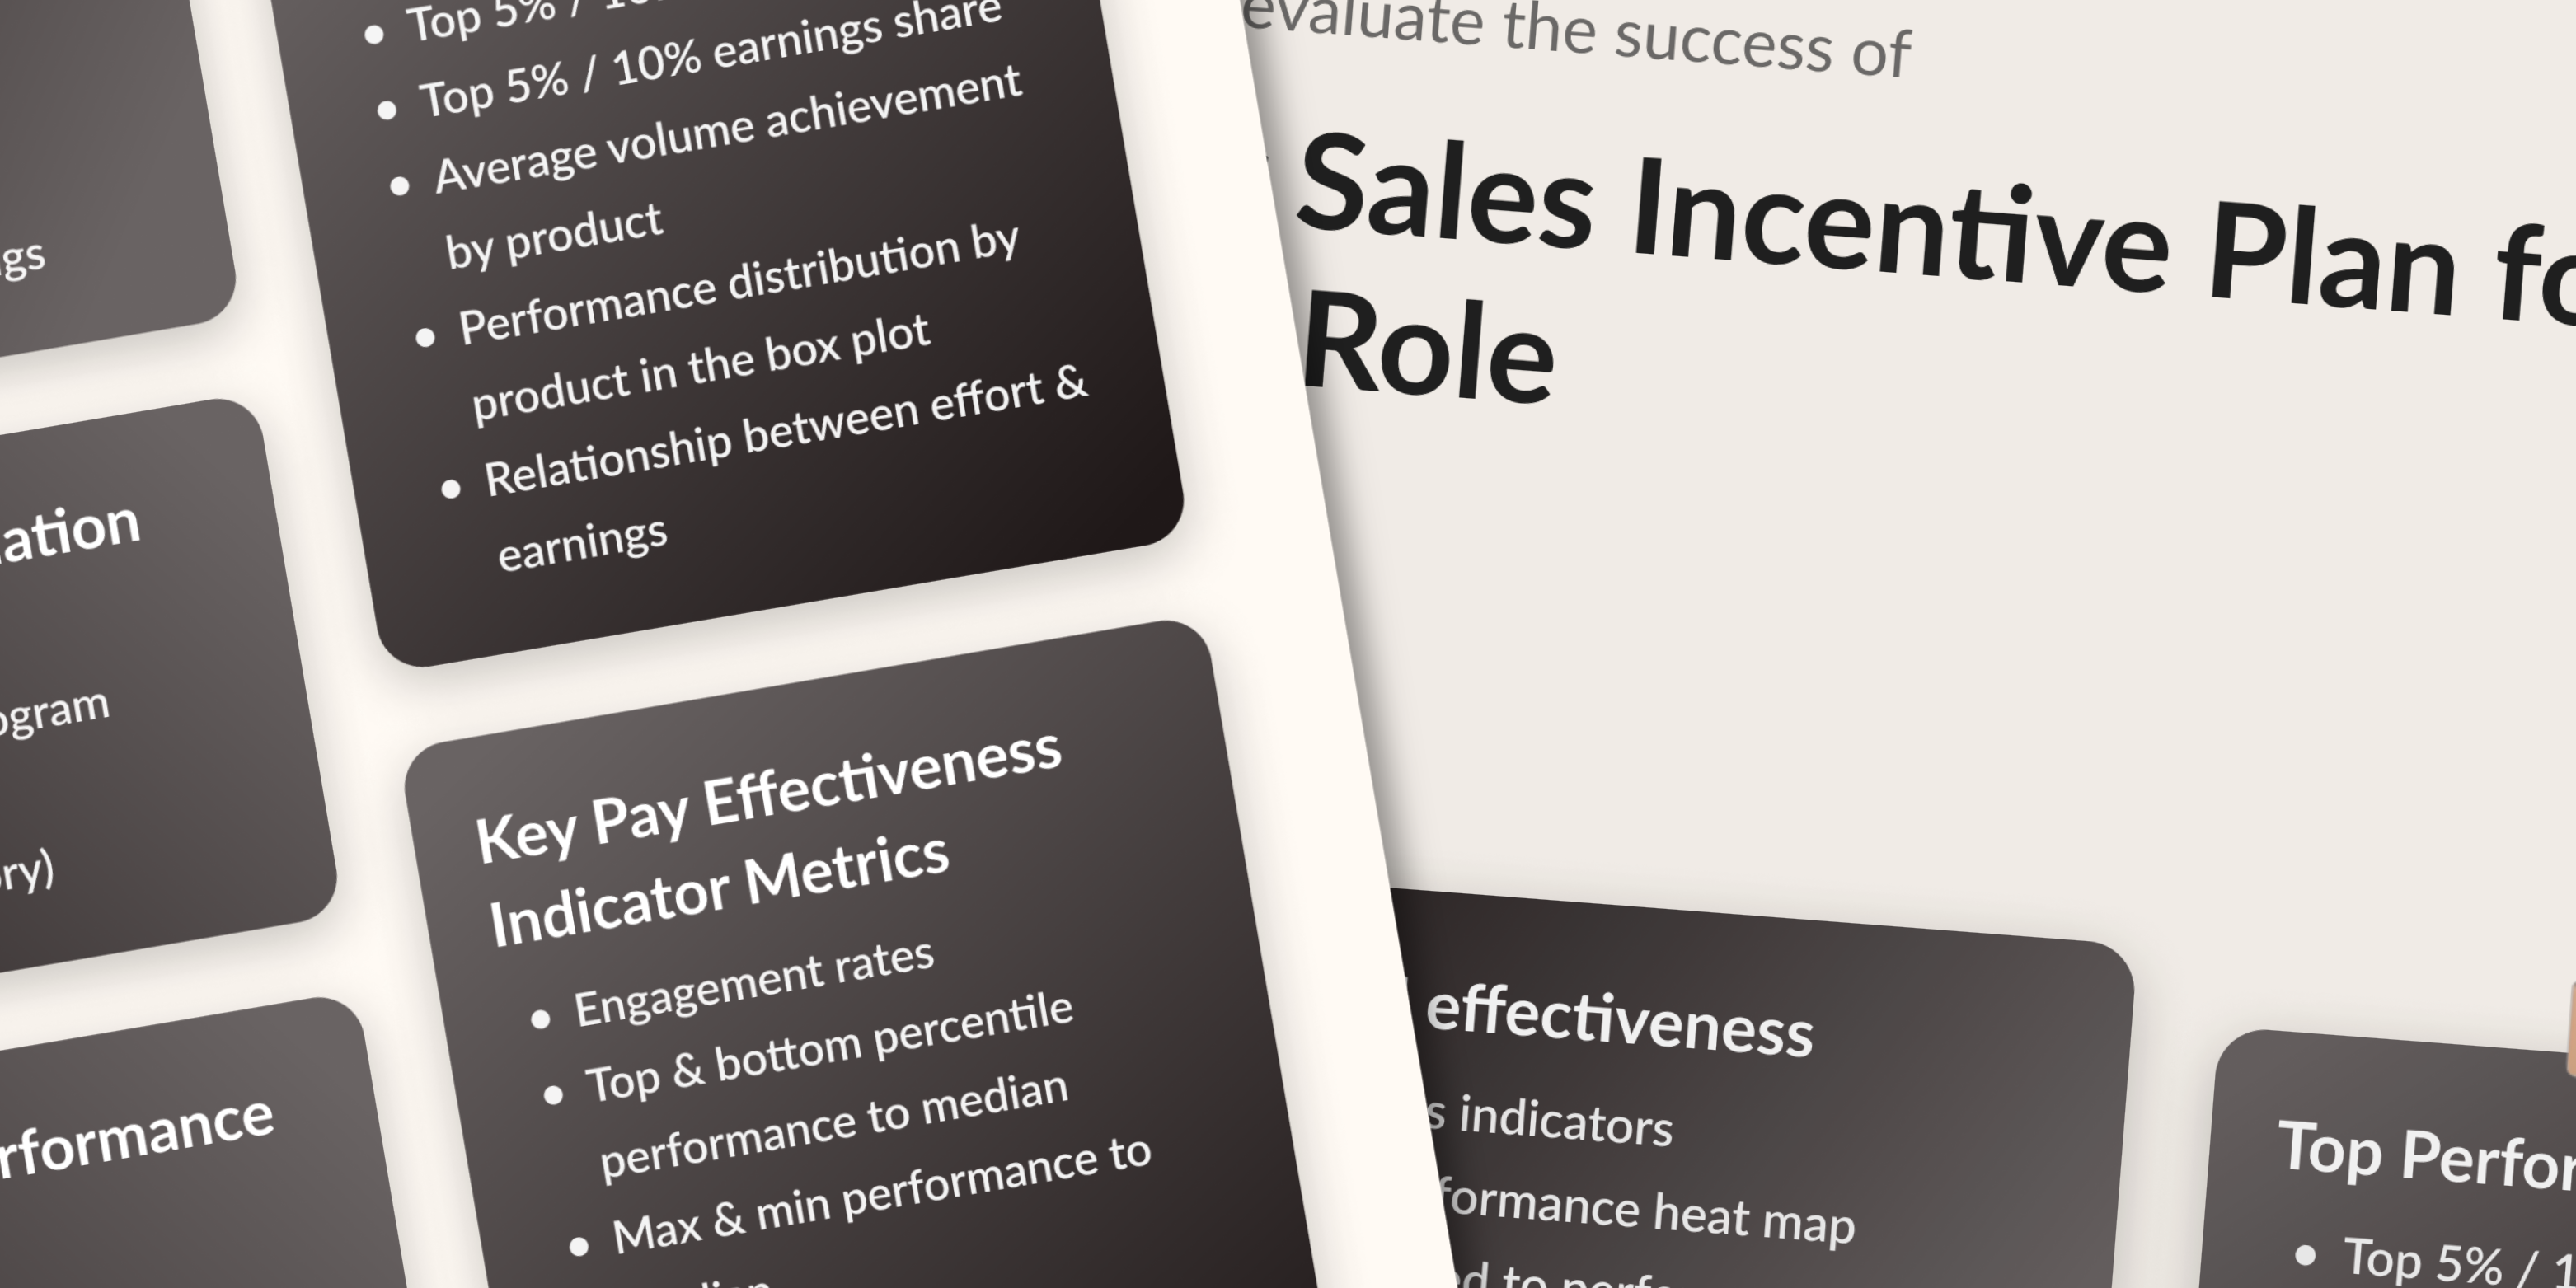 Sales Incentive Plan For Each Role